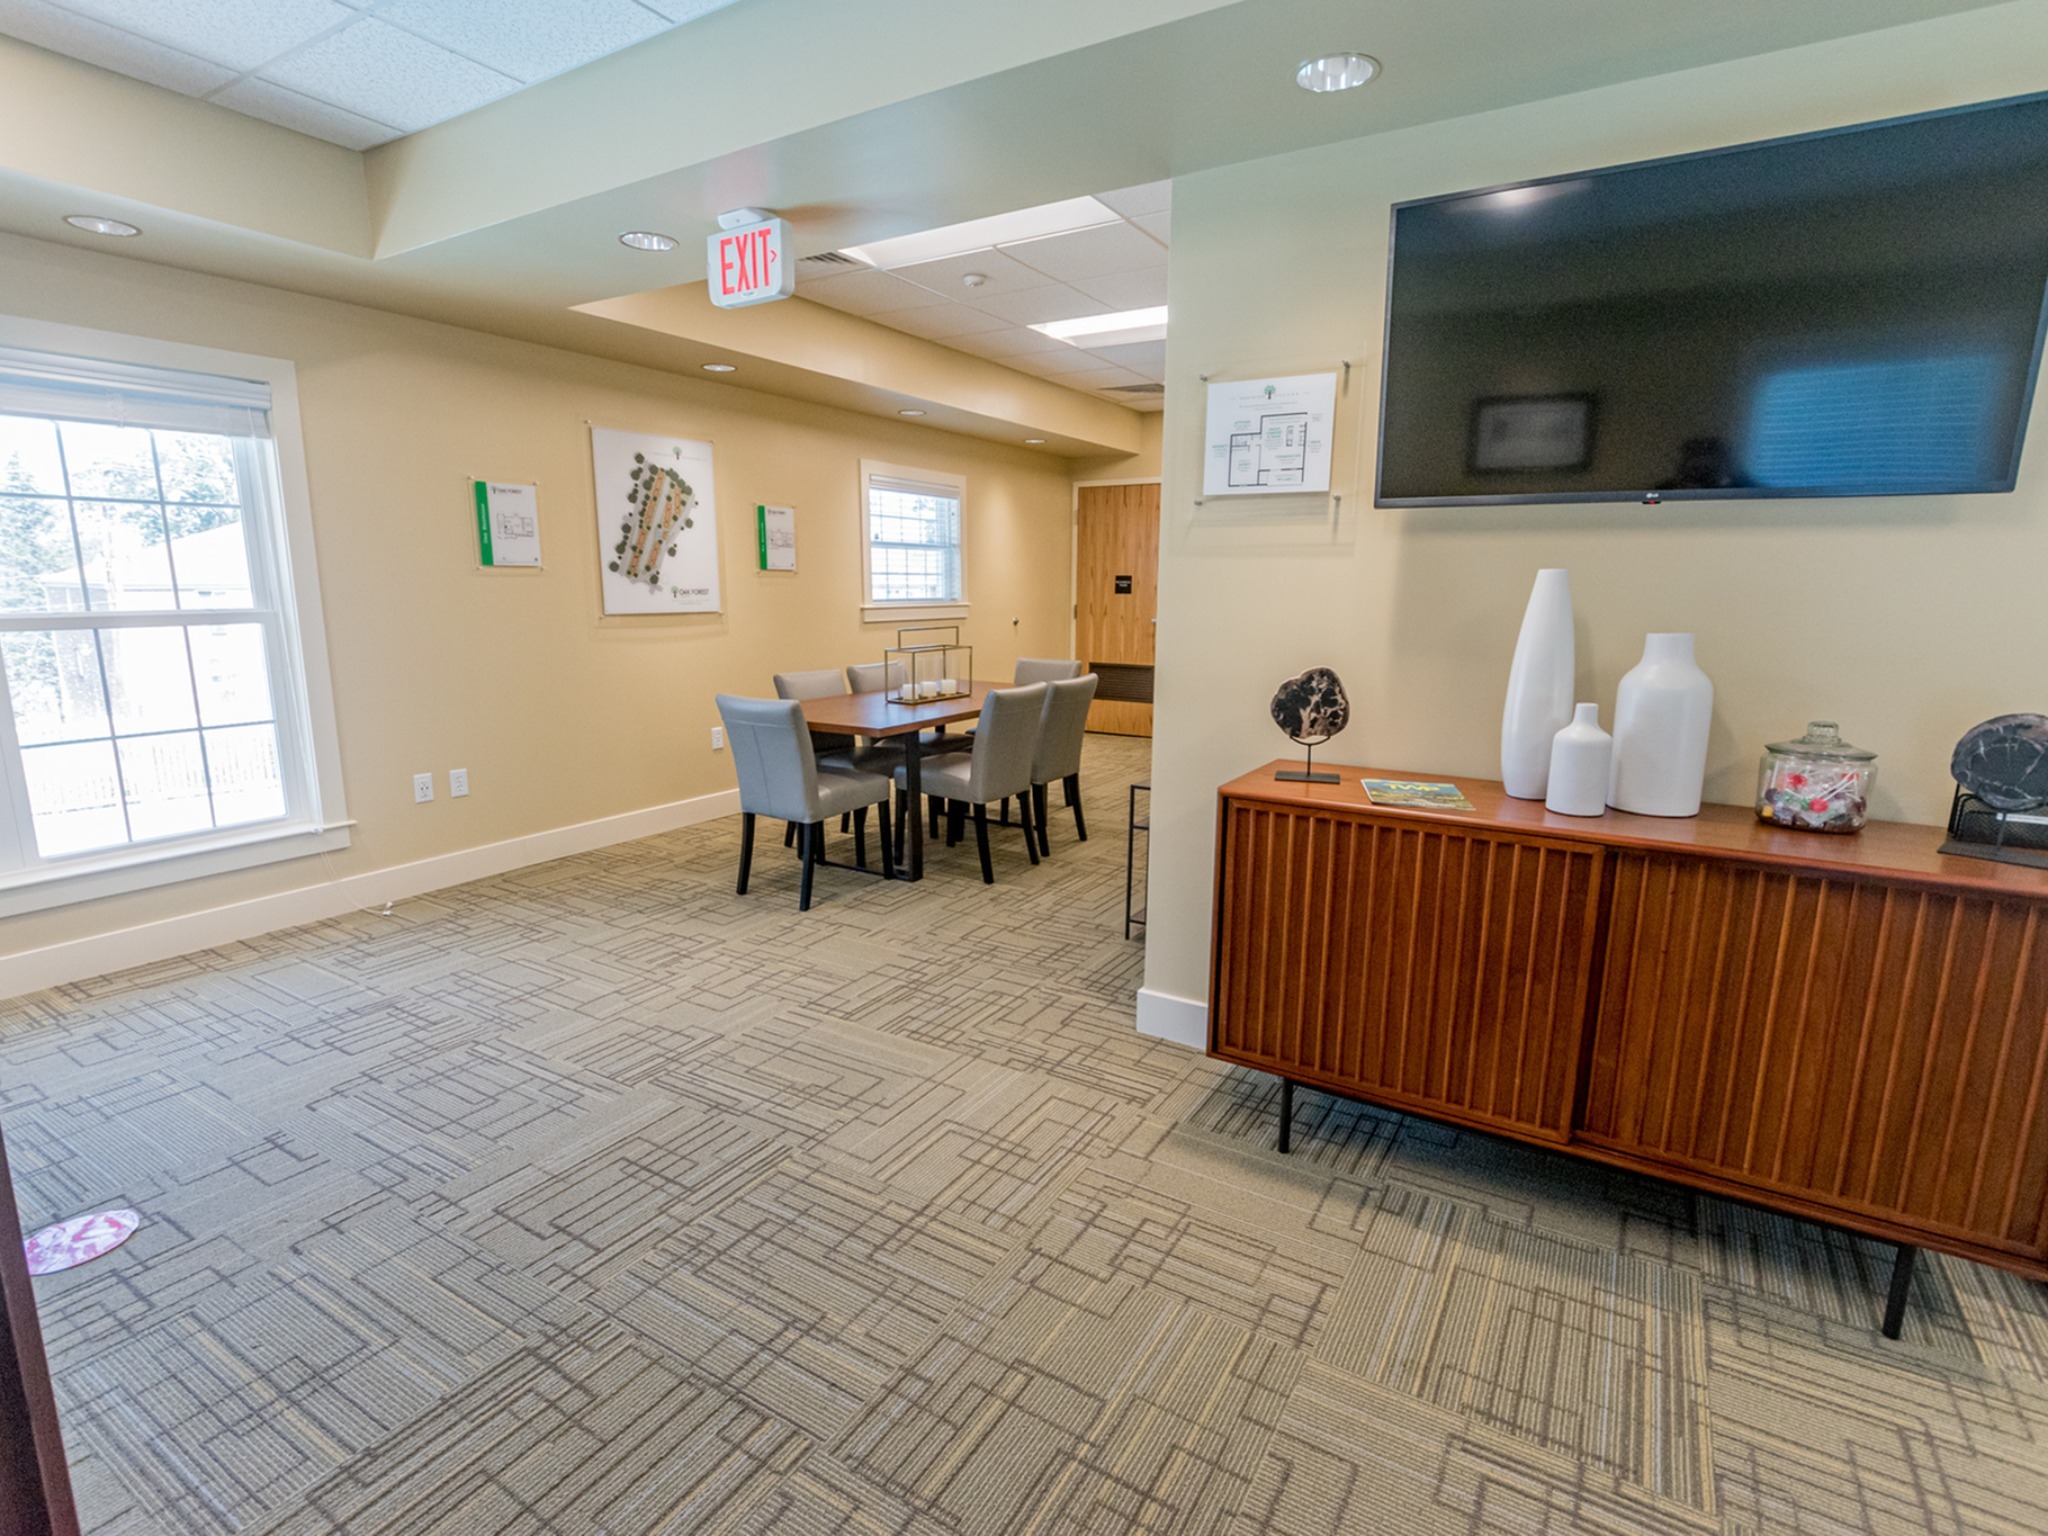 Oak Forest apartments community room area, fitted with a table and chairs, on wall TV, and carpet flooring